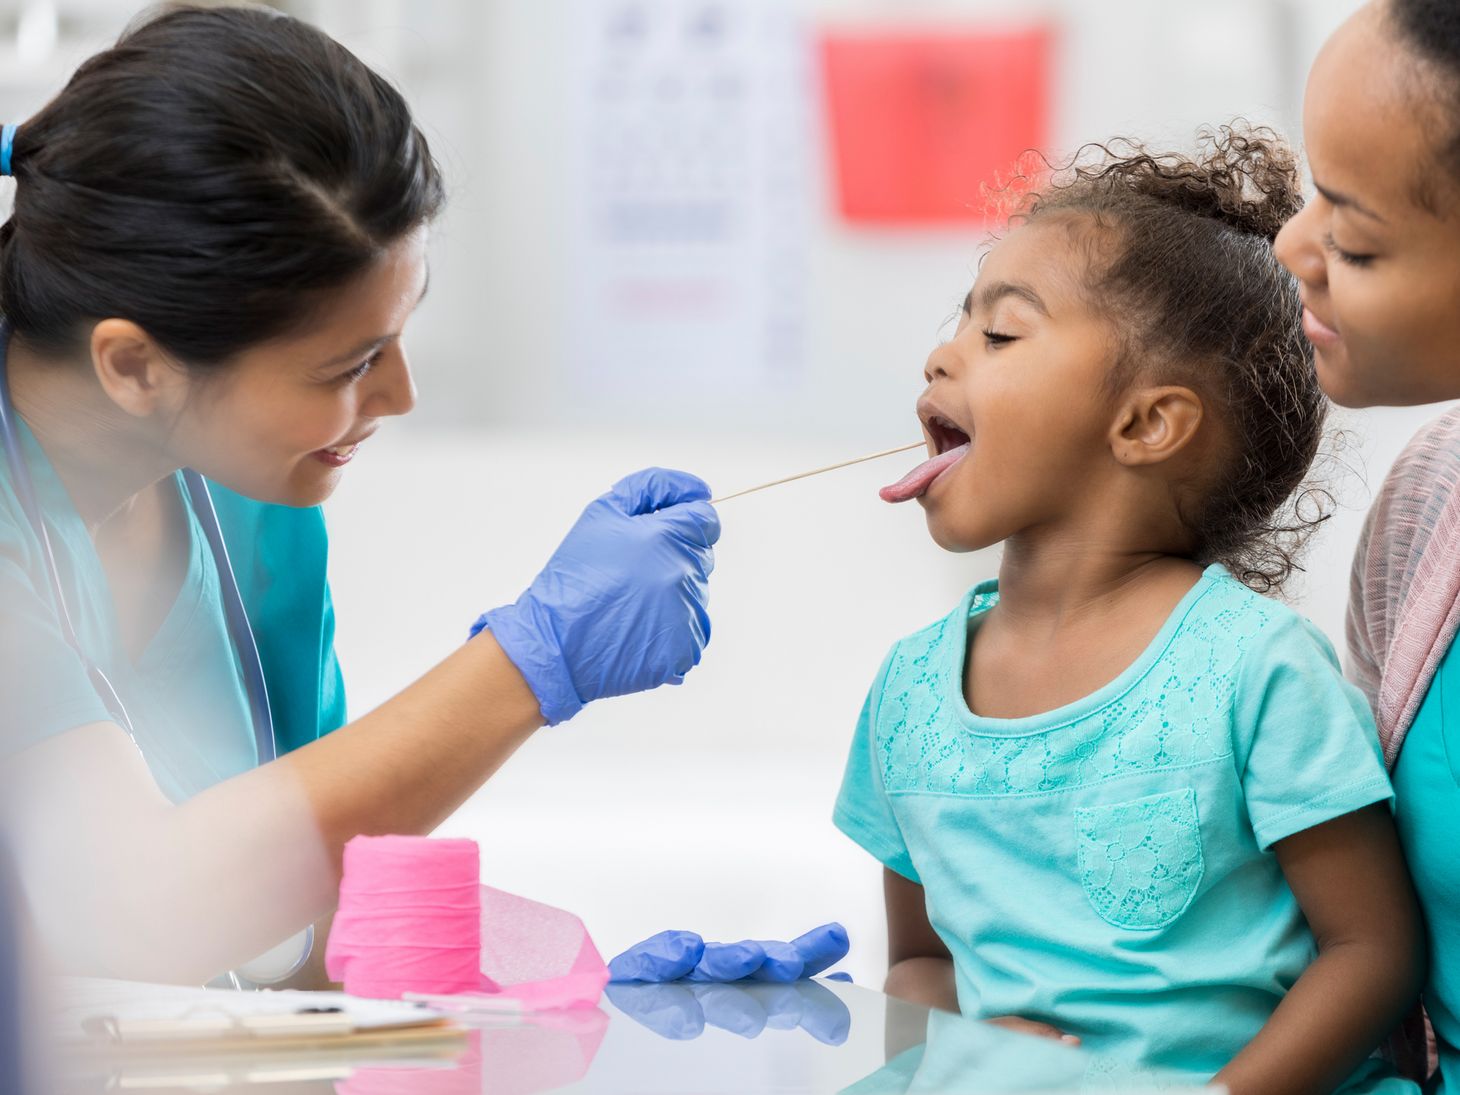 Nurse looking inside a child's mouth.